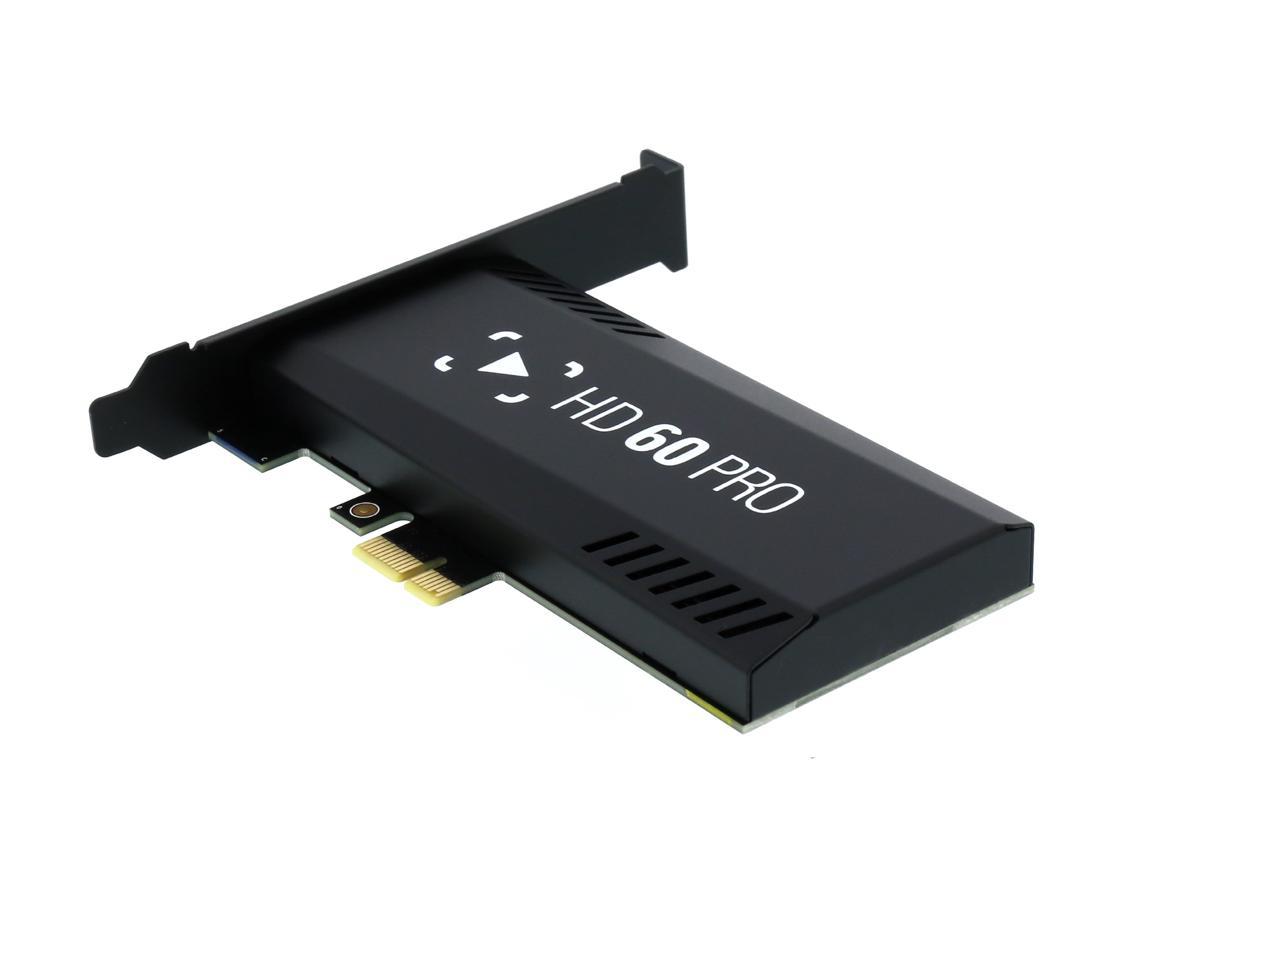 Open Box Elgato Game Capture Hd60 Pro Stream And Record In 1080p 60 Fps Superior Low Latency